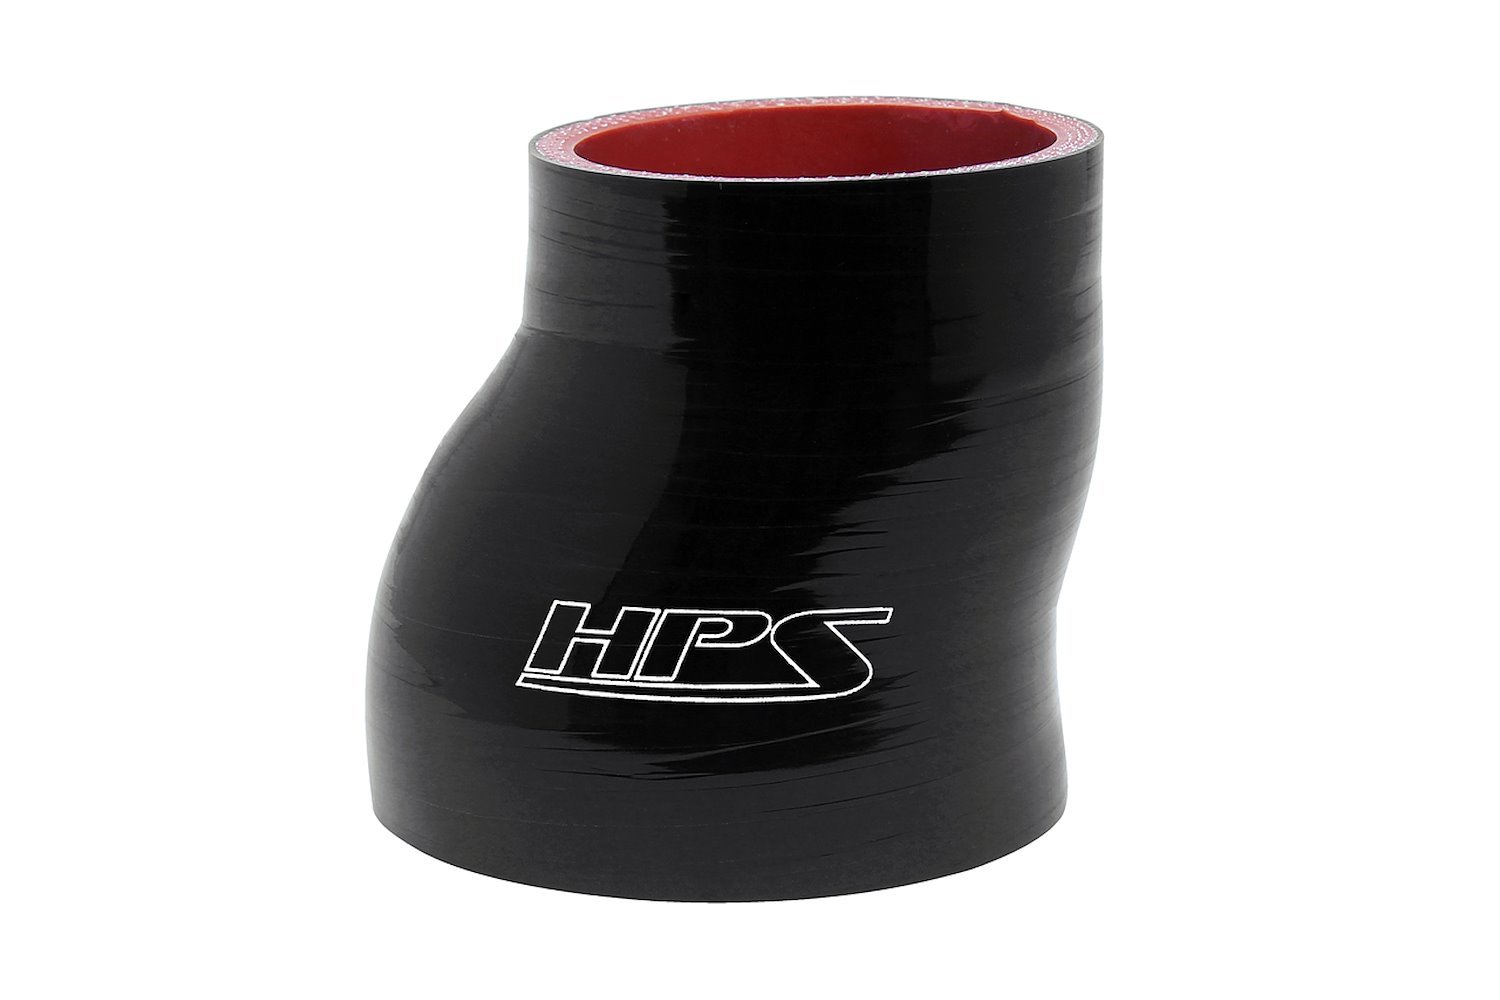 HTSOR-200-275-BLK Silicone Offset Reducer Hose, High-Temp Reinforced, 2 in. - 2-3/4 in. ID, 3 in. Long, Black